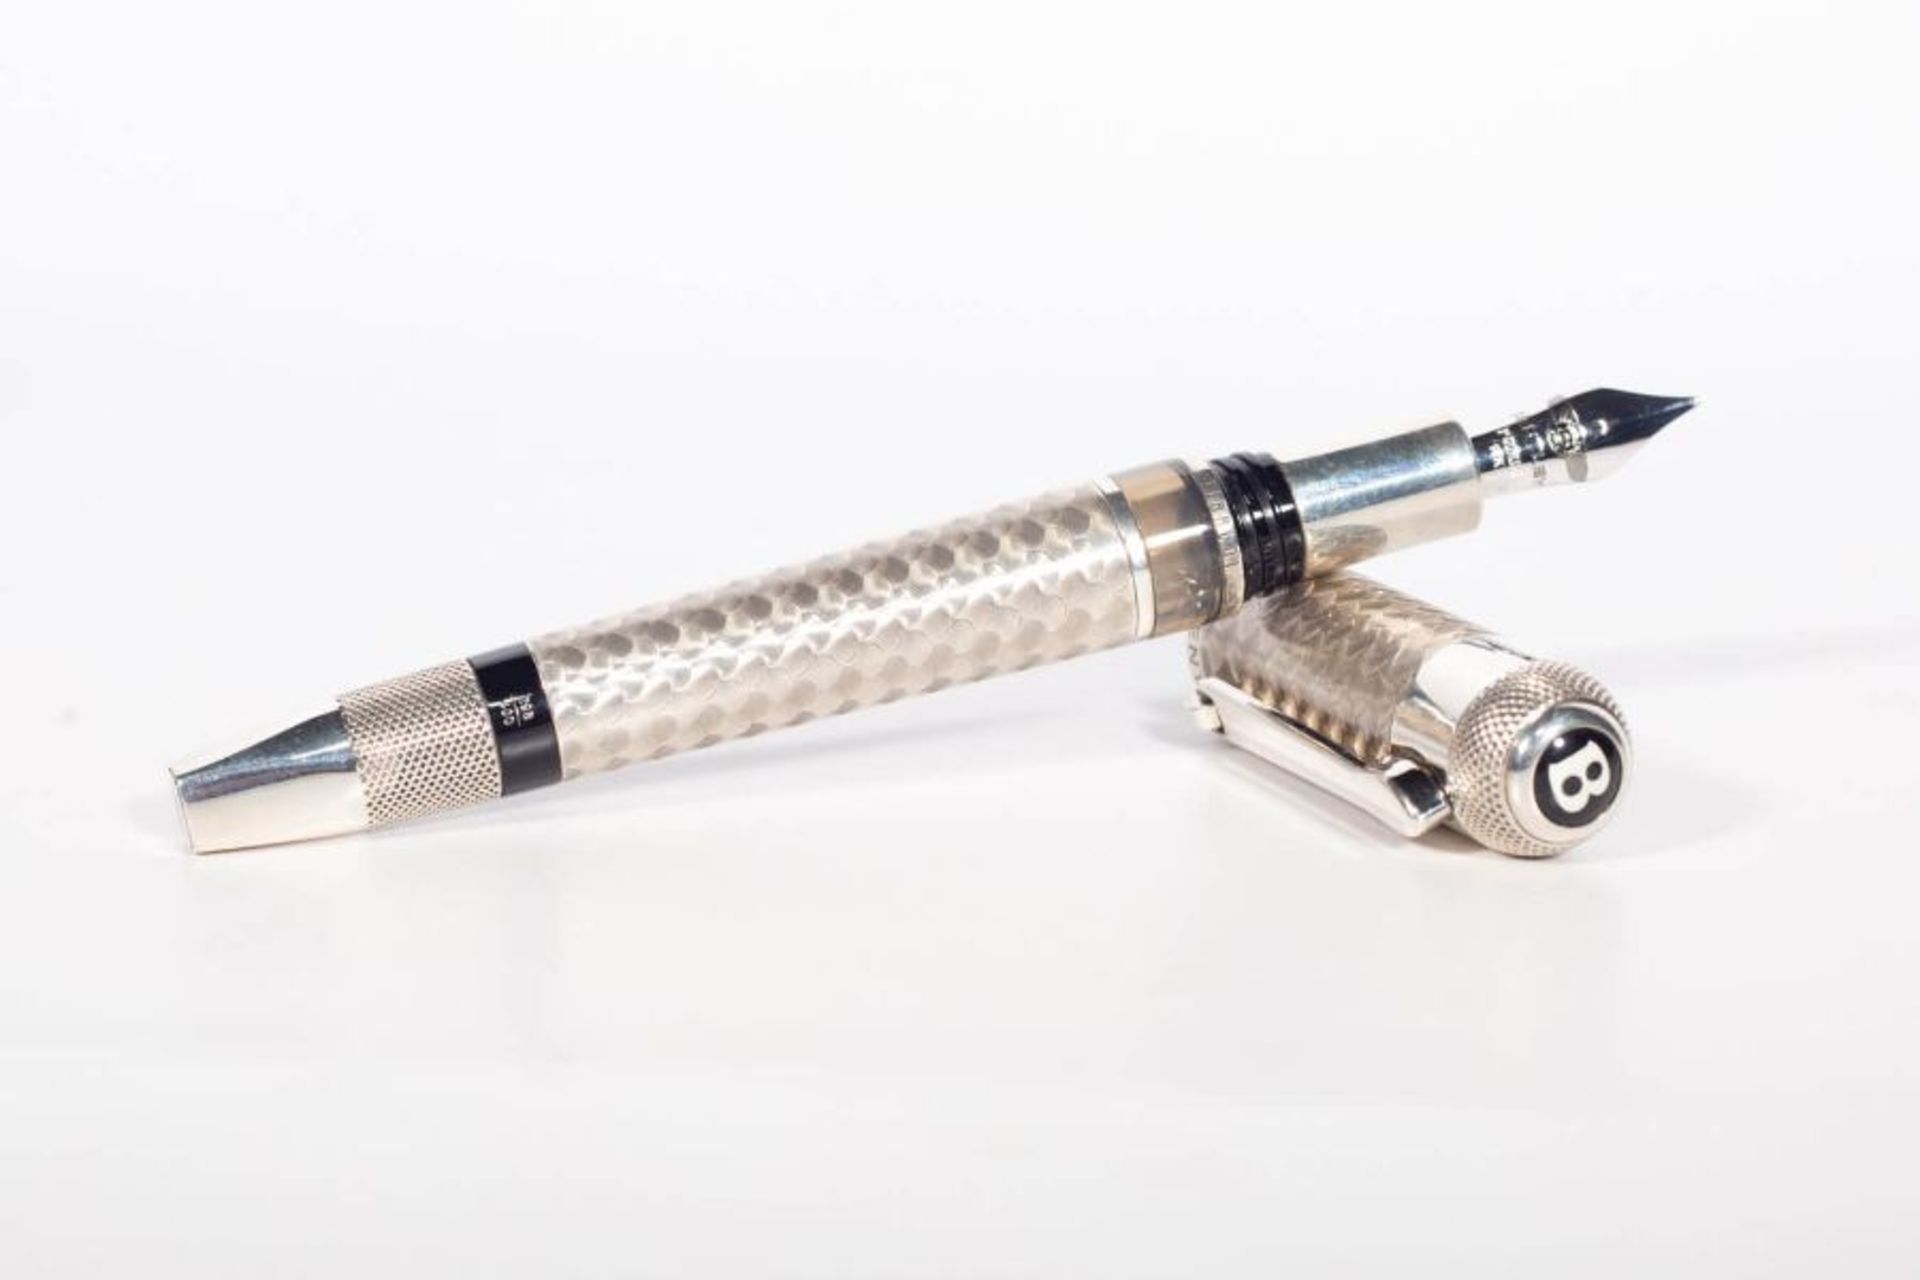 A Tibaldi for Bentley special edition Sterling silver fountain pen to commemorate 60 years of - Image 11 of 14